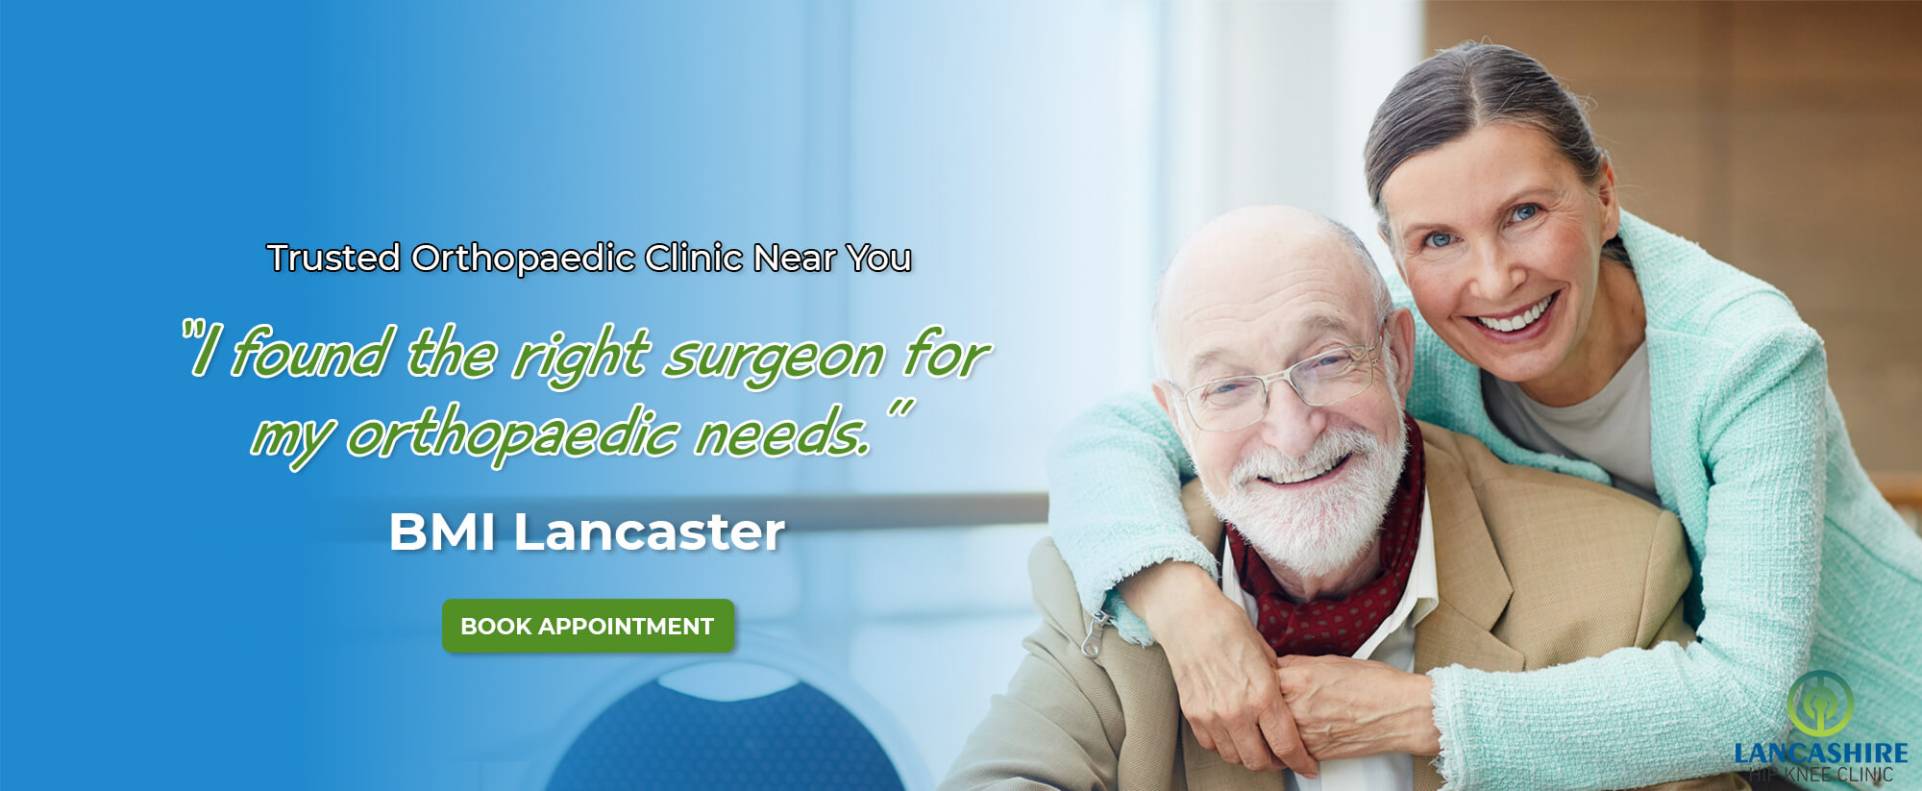 Full Knee Replacement Surgery | Lancashire Clinic